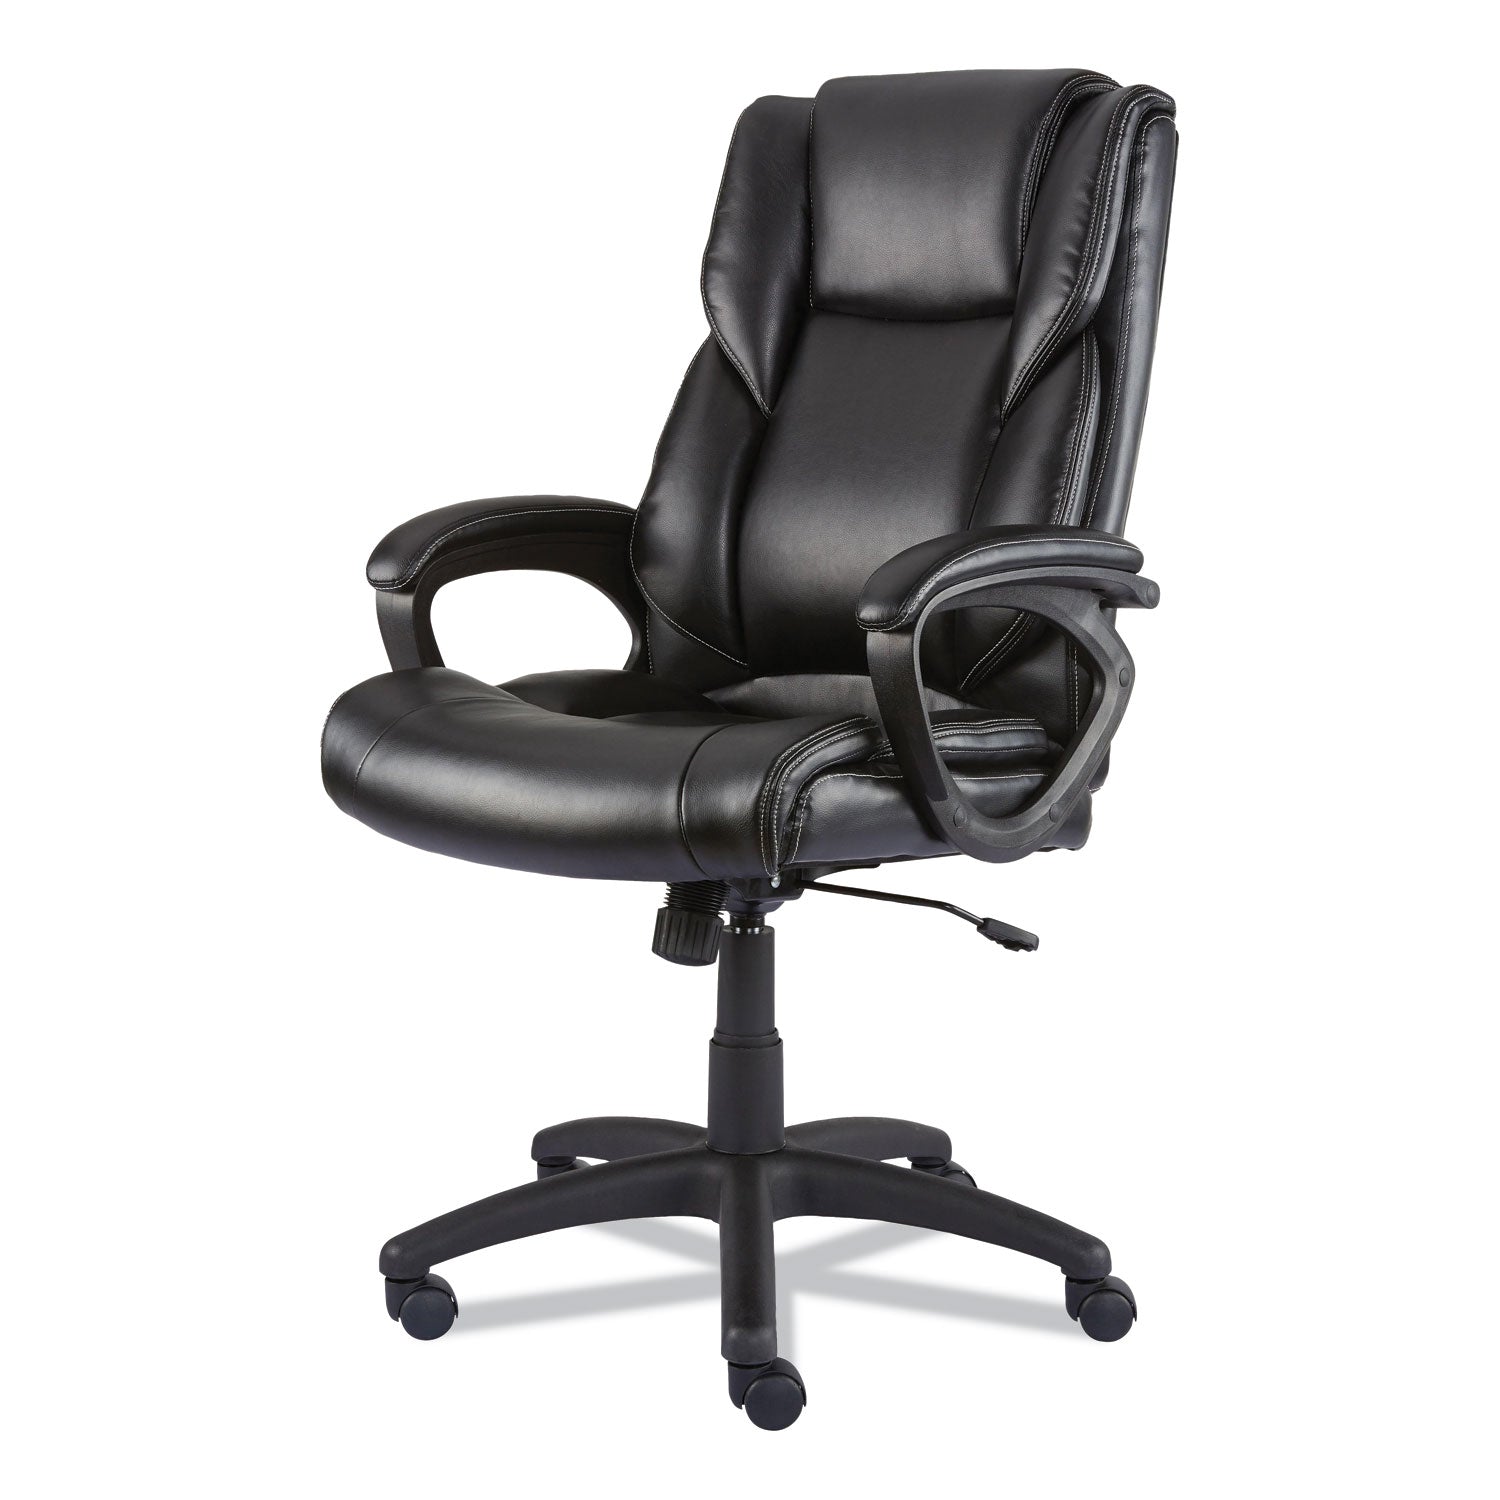 Alera Brosna Series Mid-Back Task Chair, Supports Up to 250 lb, 18.15" to 21.77 Seat Height, Black Seat/Back, Black Base - 3